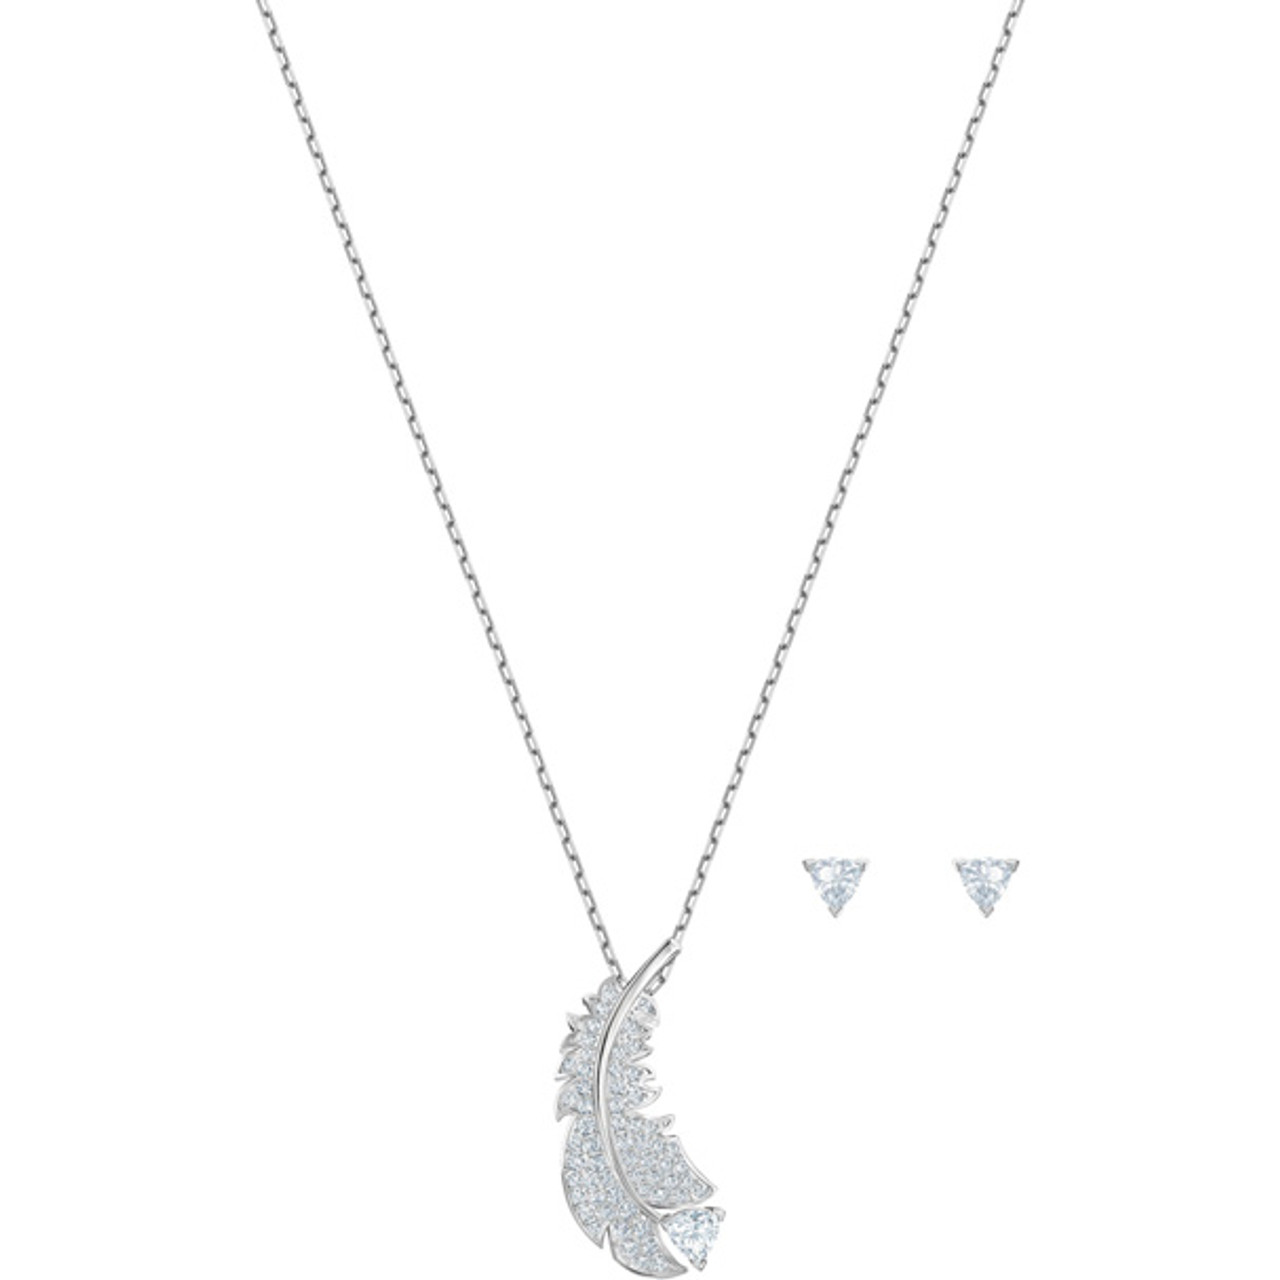 Swarovski Nice Feather Pendant Necklace Rose Gold-Tone Plated White  Crystals 5663483 - First Class Watches™ USA